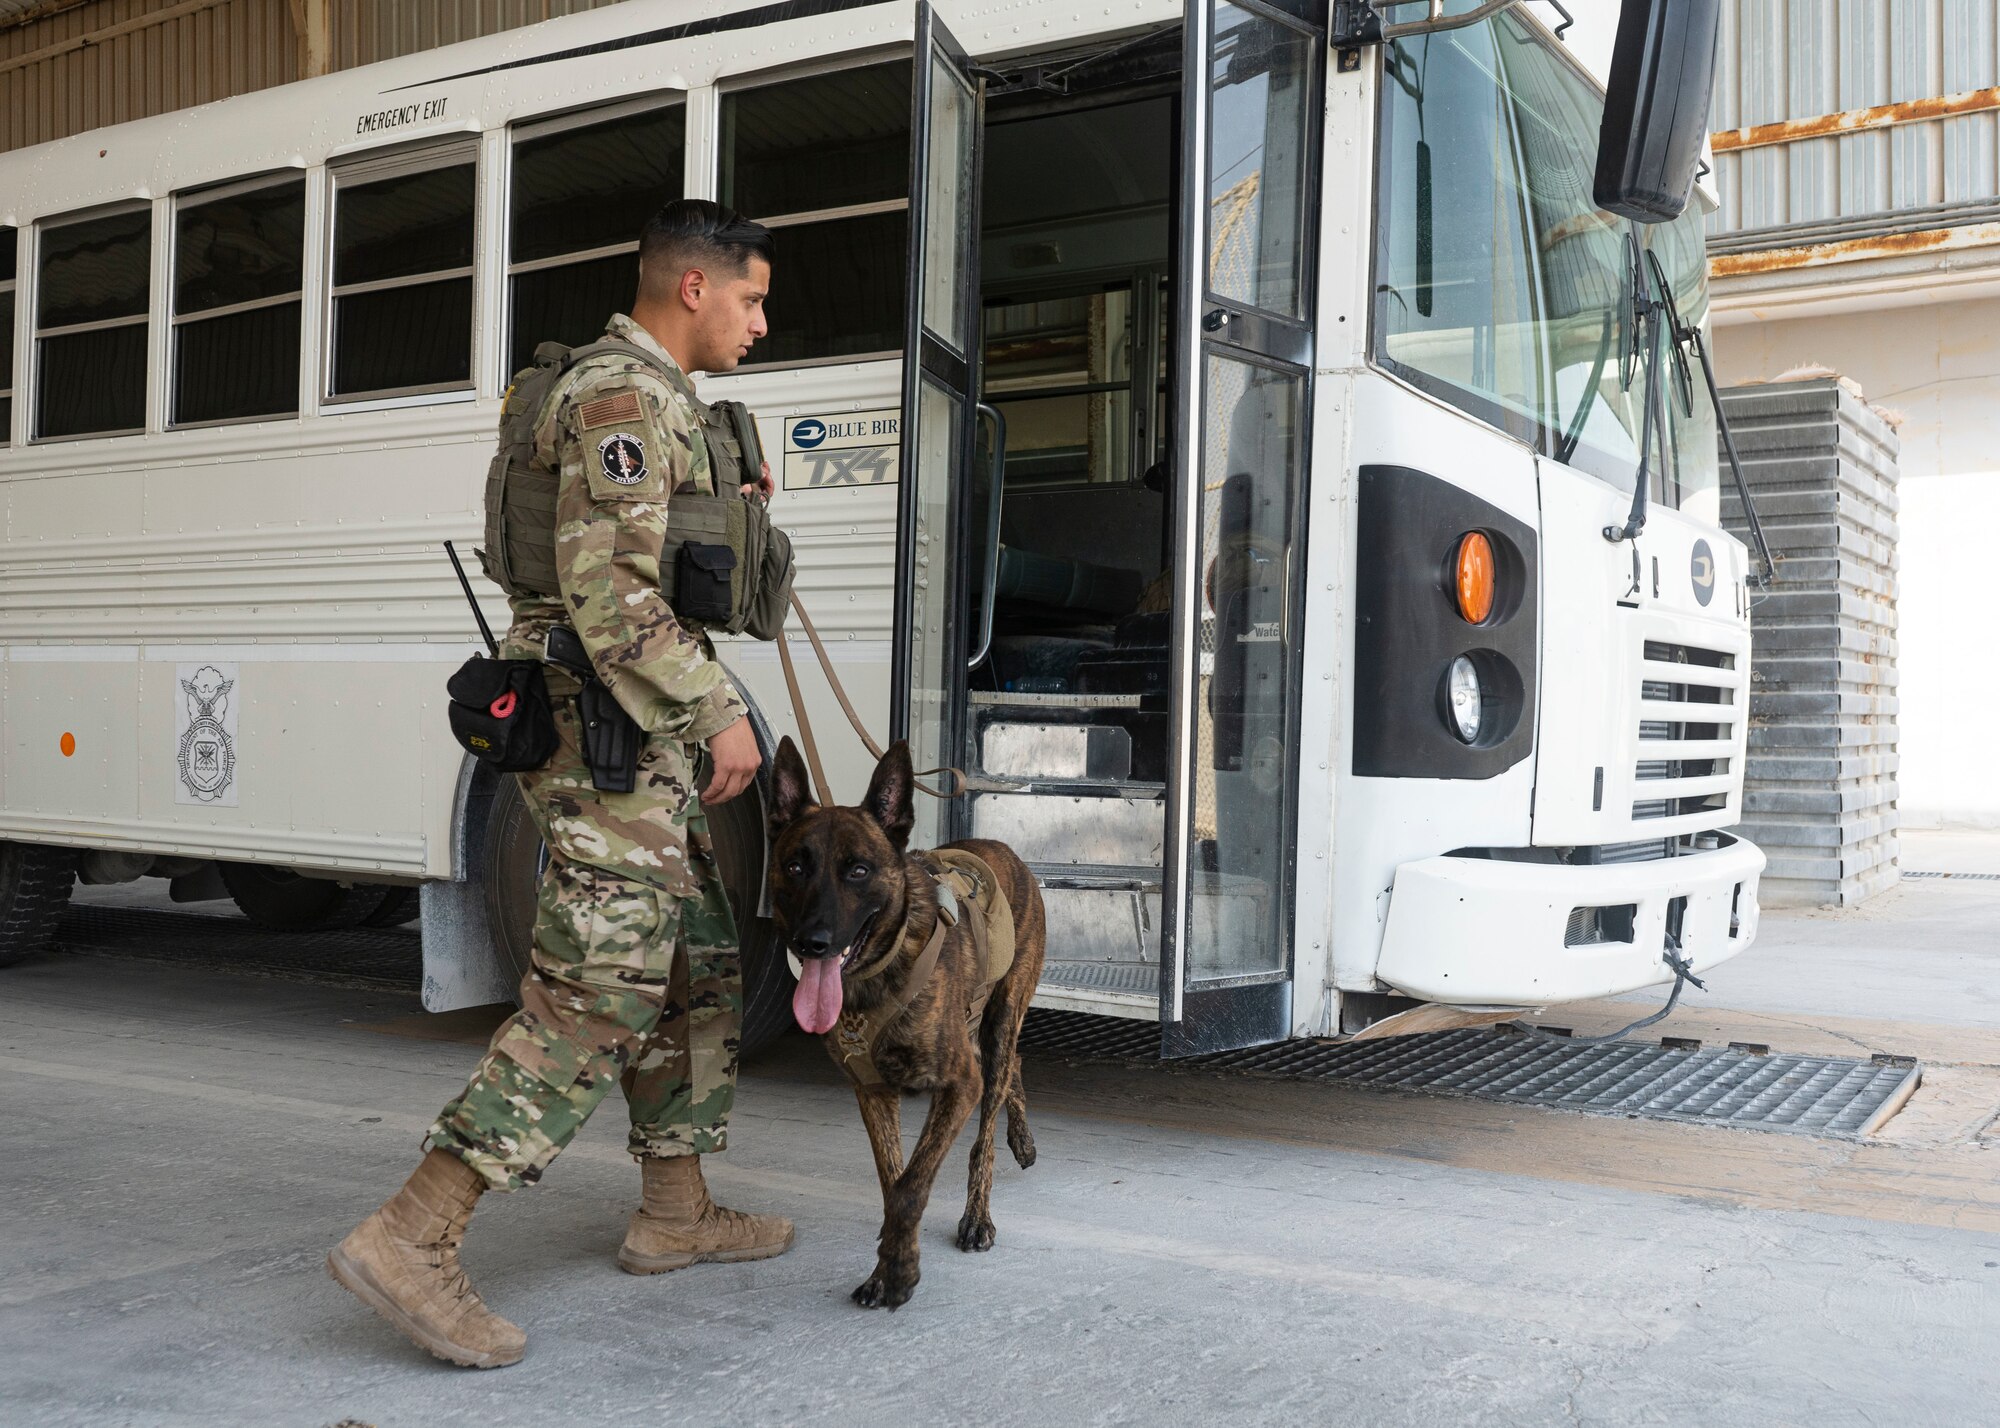 U.S. Air Force Staff Sgt. Angel Flores, 379th Expeditionary Security Forces Squadron military working dog handler, and AAslan, 379th ESFS MWD, search a bus at Al Udeid Air Base, Qatar, July 2, 2020. Vehicles are searched to protect the installation and its assets. (U.S. Air Force photo by Senior Airman Olivia Grooms)